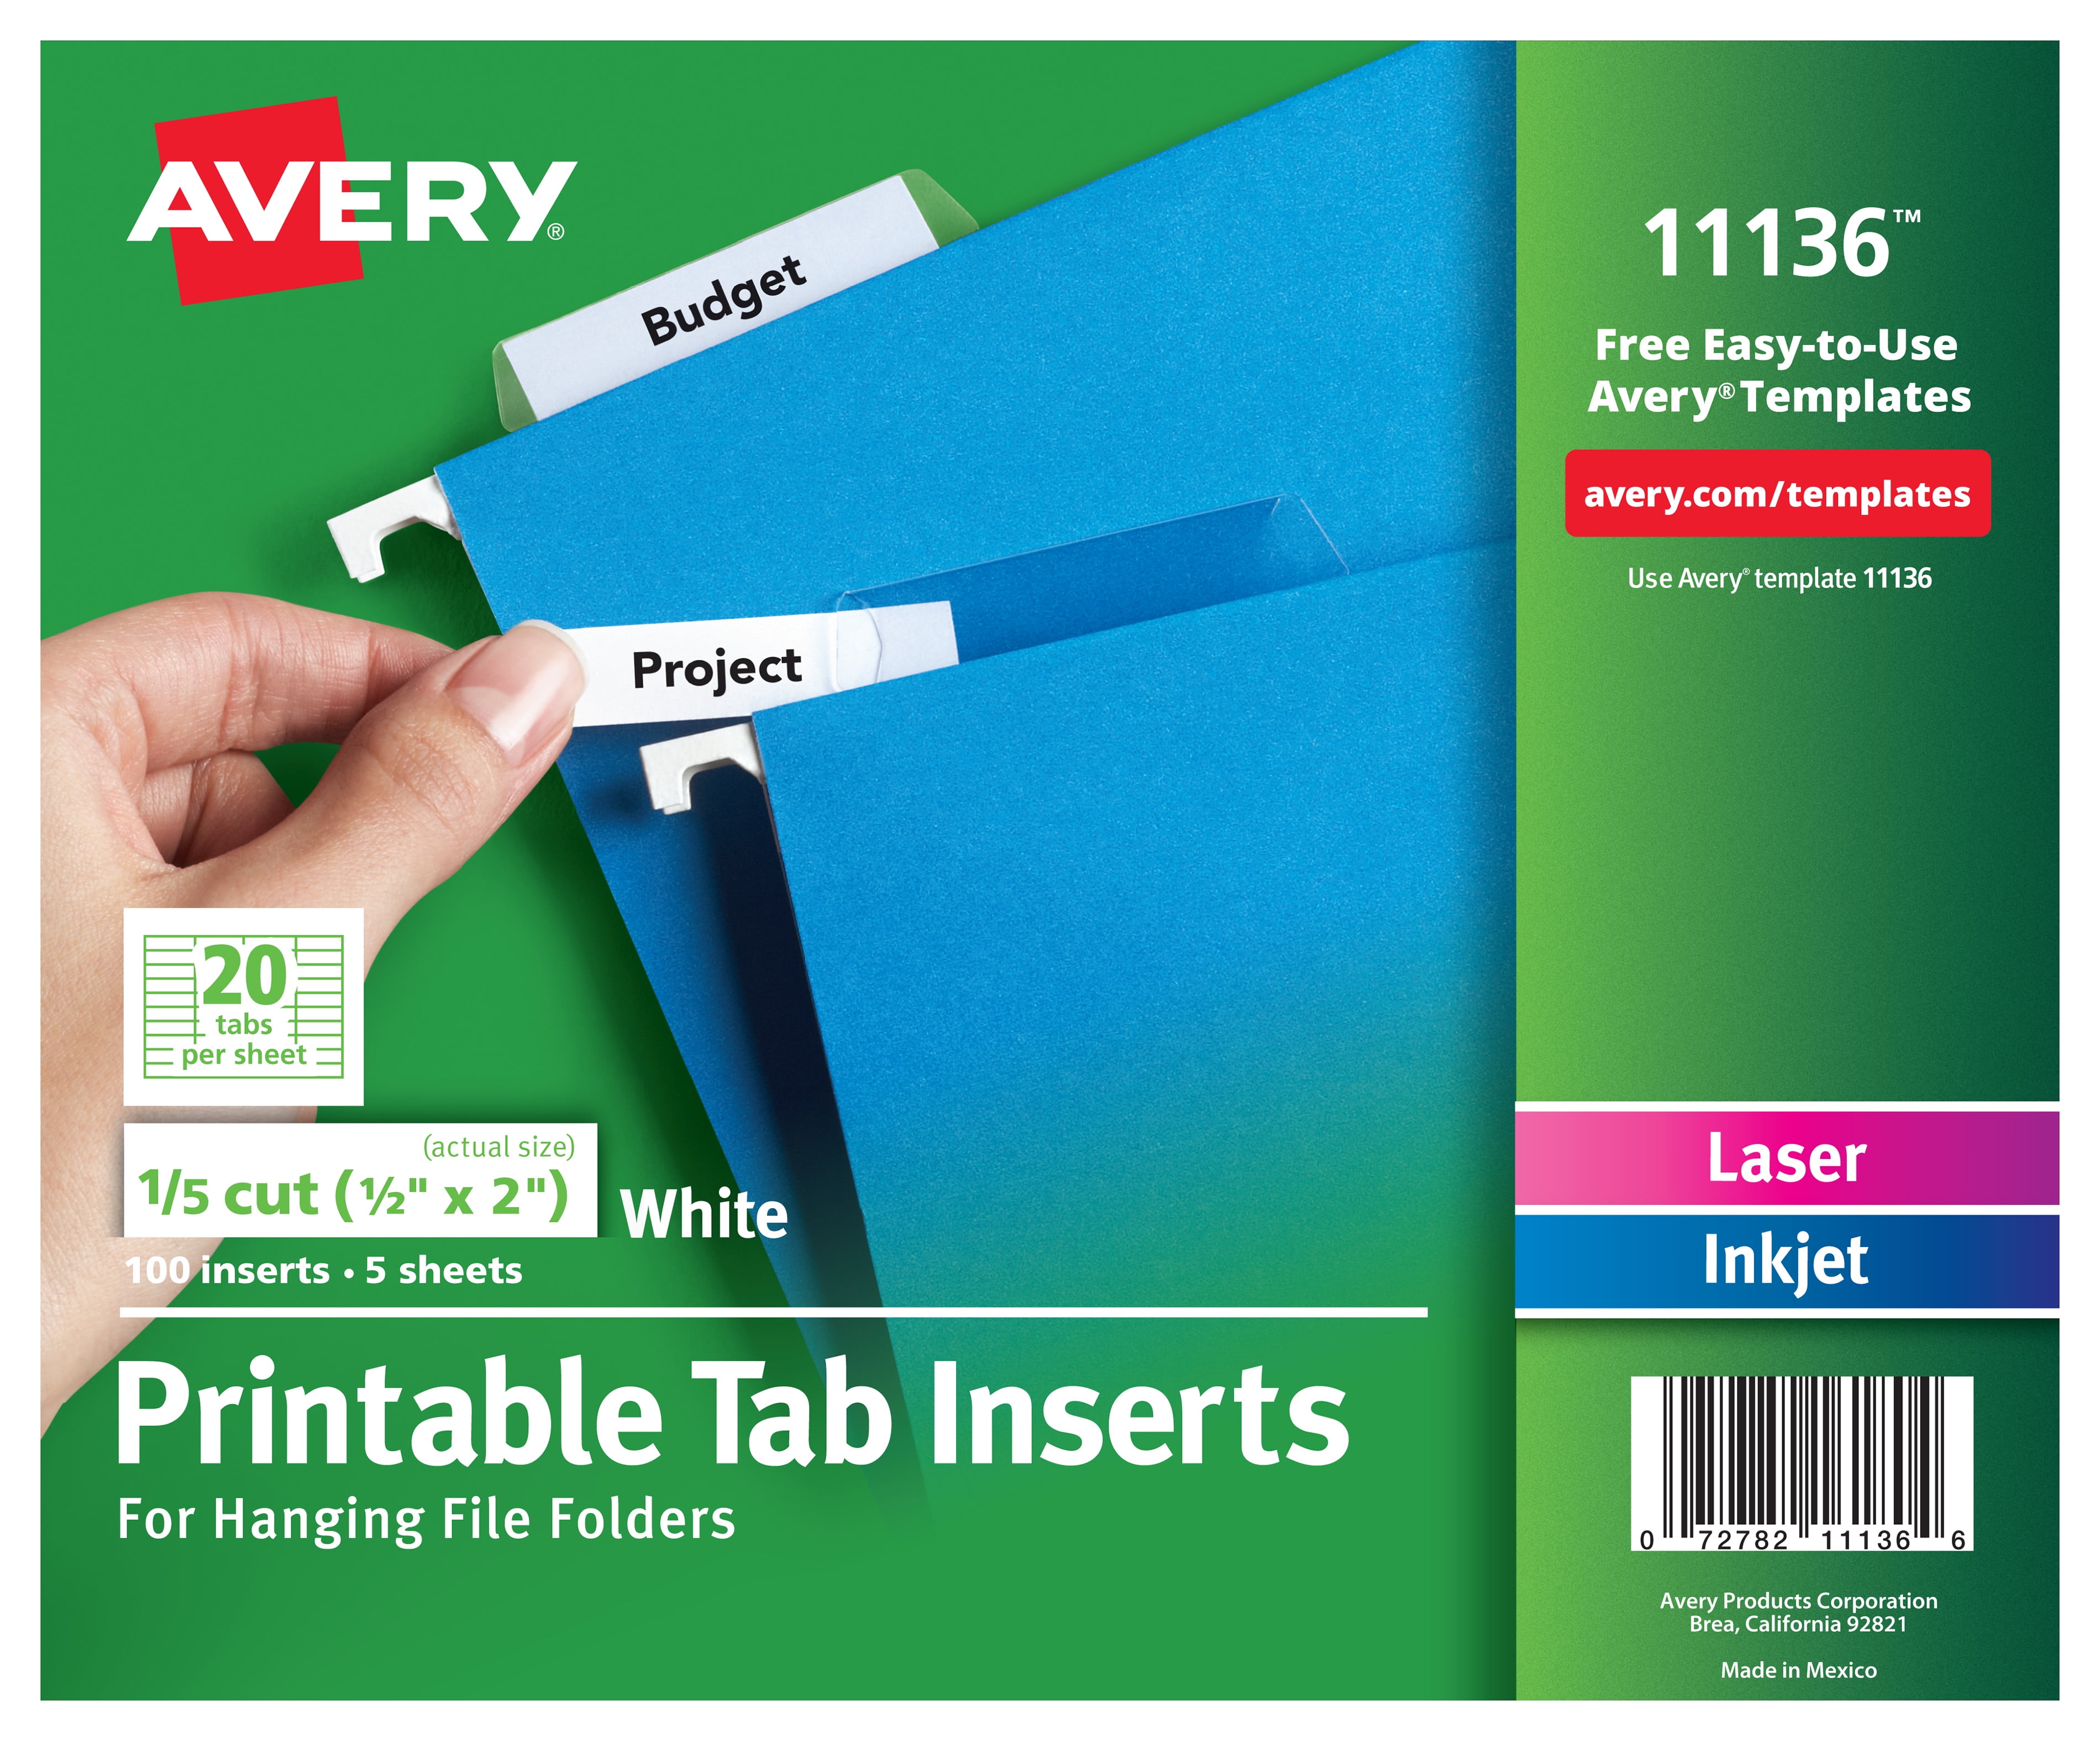 avery-printable-tab-inserts-for-hanging-file-folders-1-5-cut-2-pack-of-100-11136-walmart